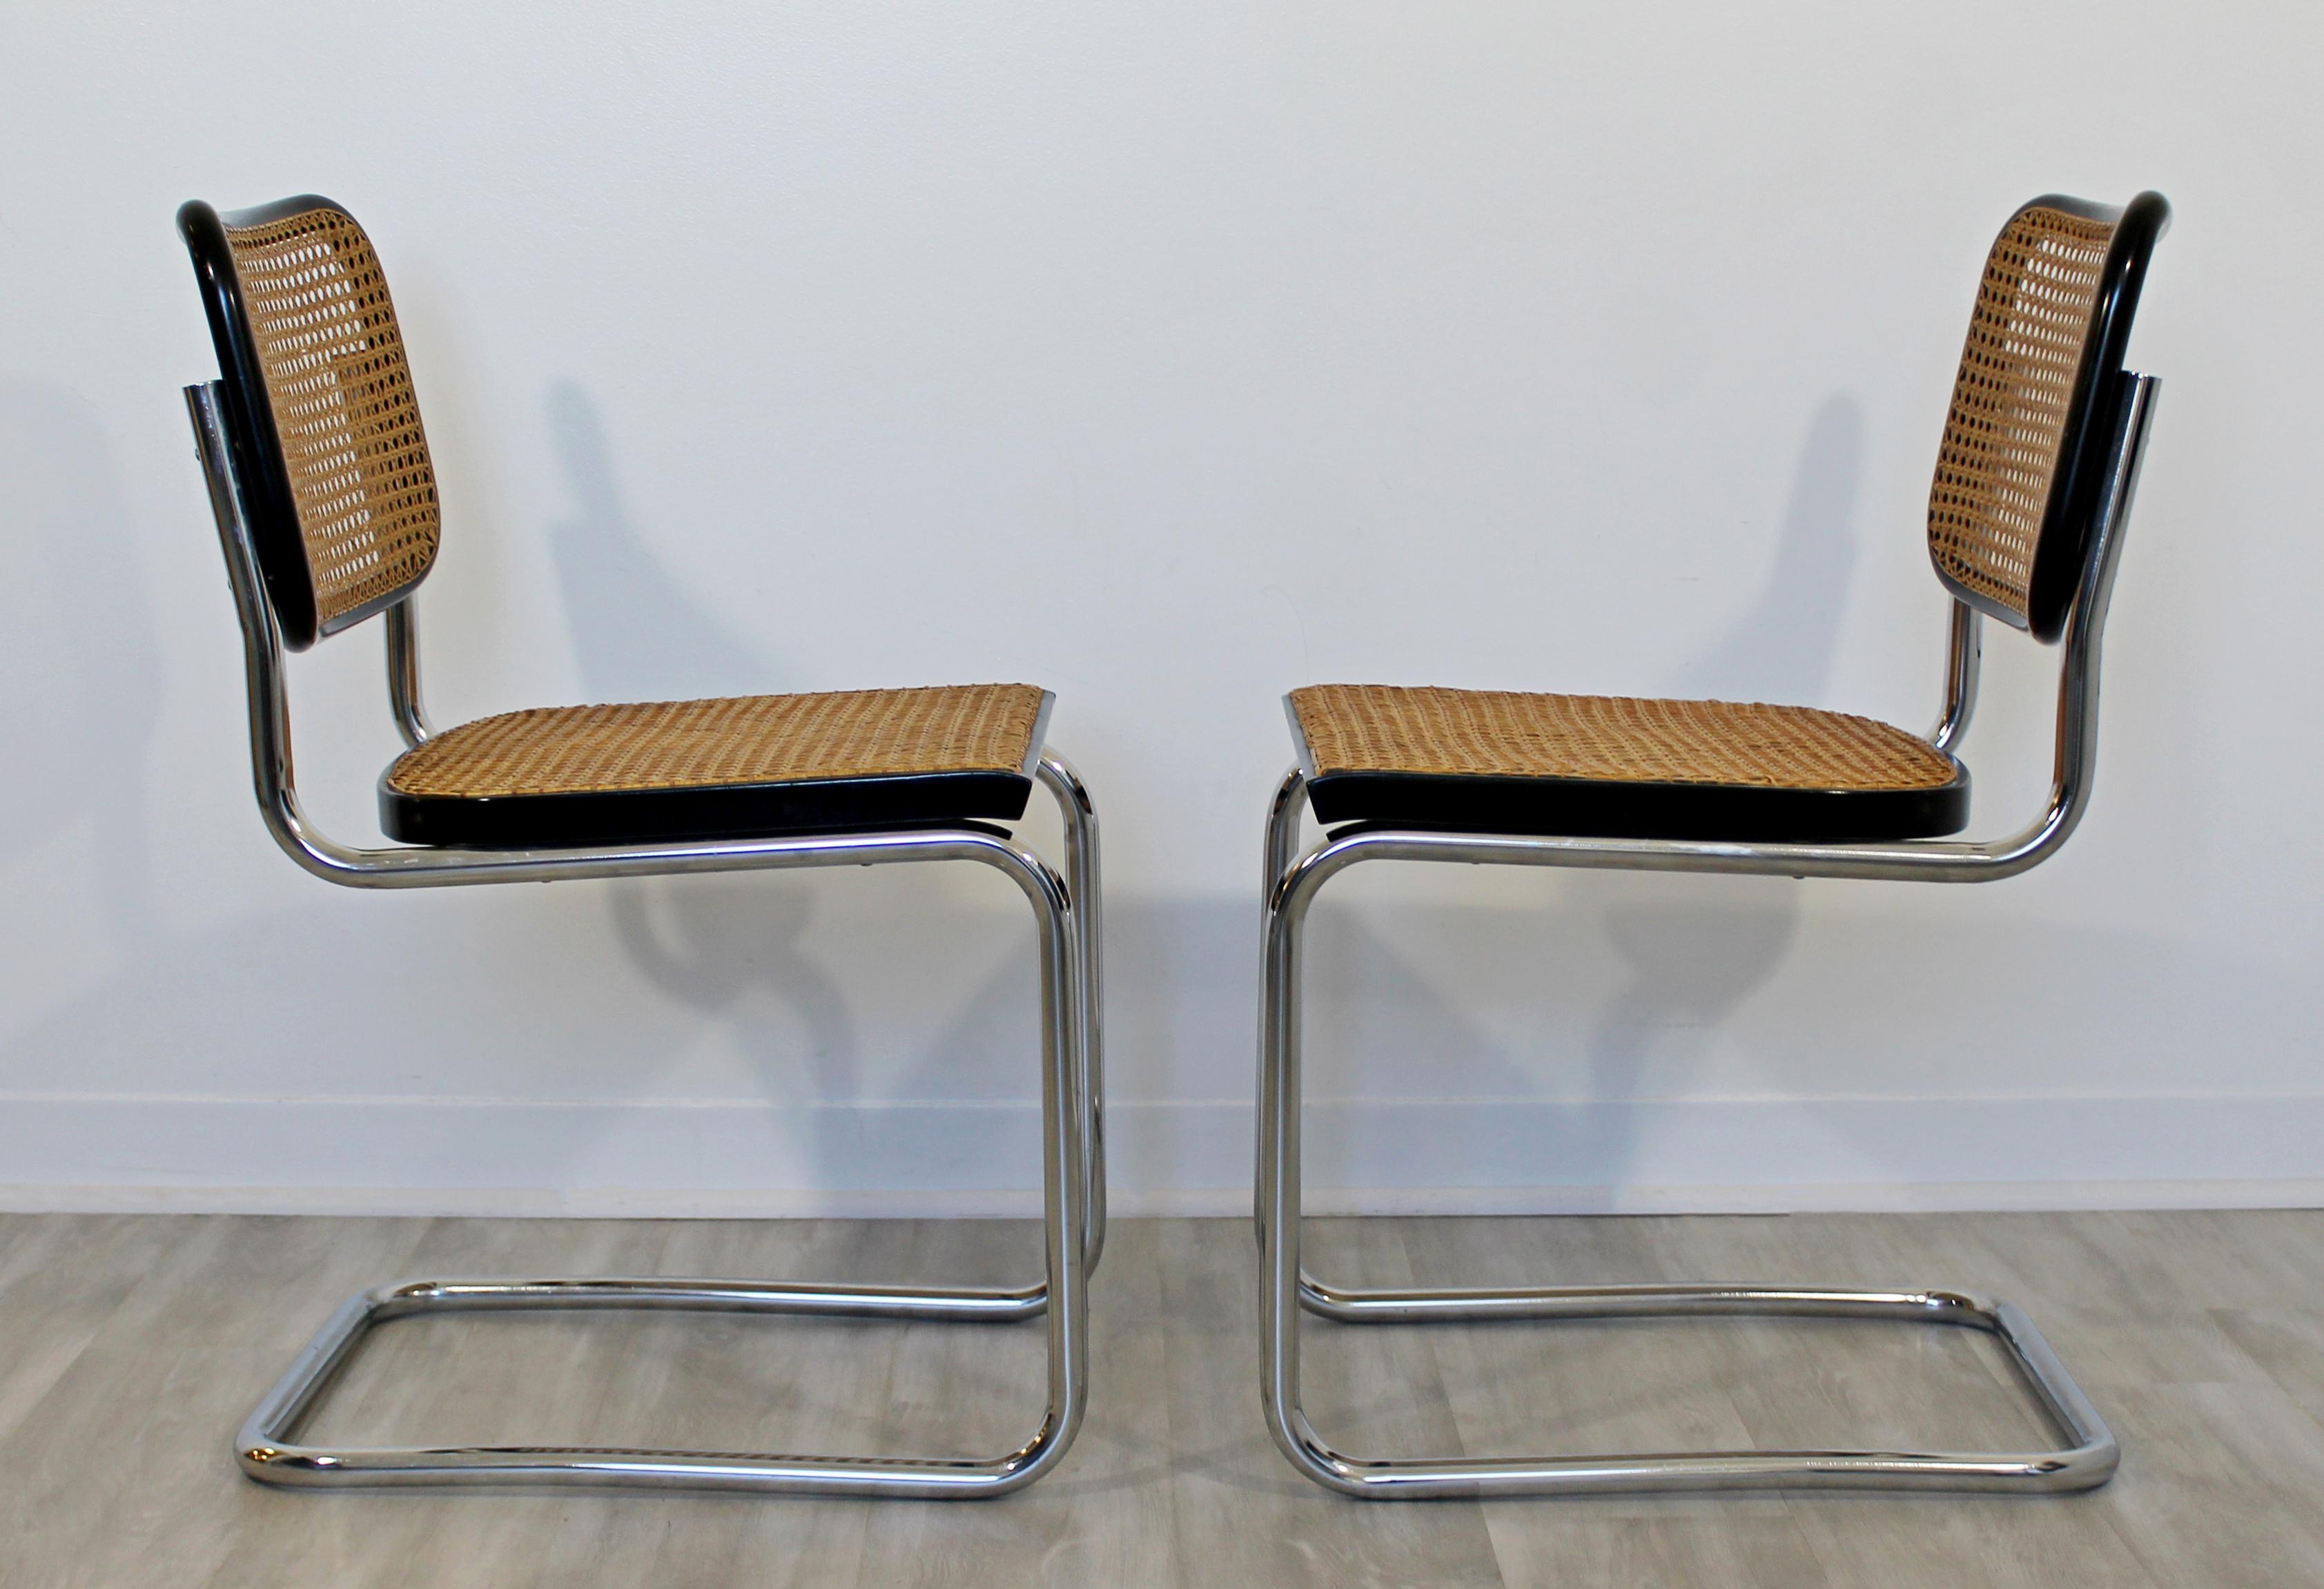 Late 20th Century Mid-Century Modern Breuer Knoll Set of 4 Cantilever Chrome and Cane Side Chairs